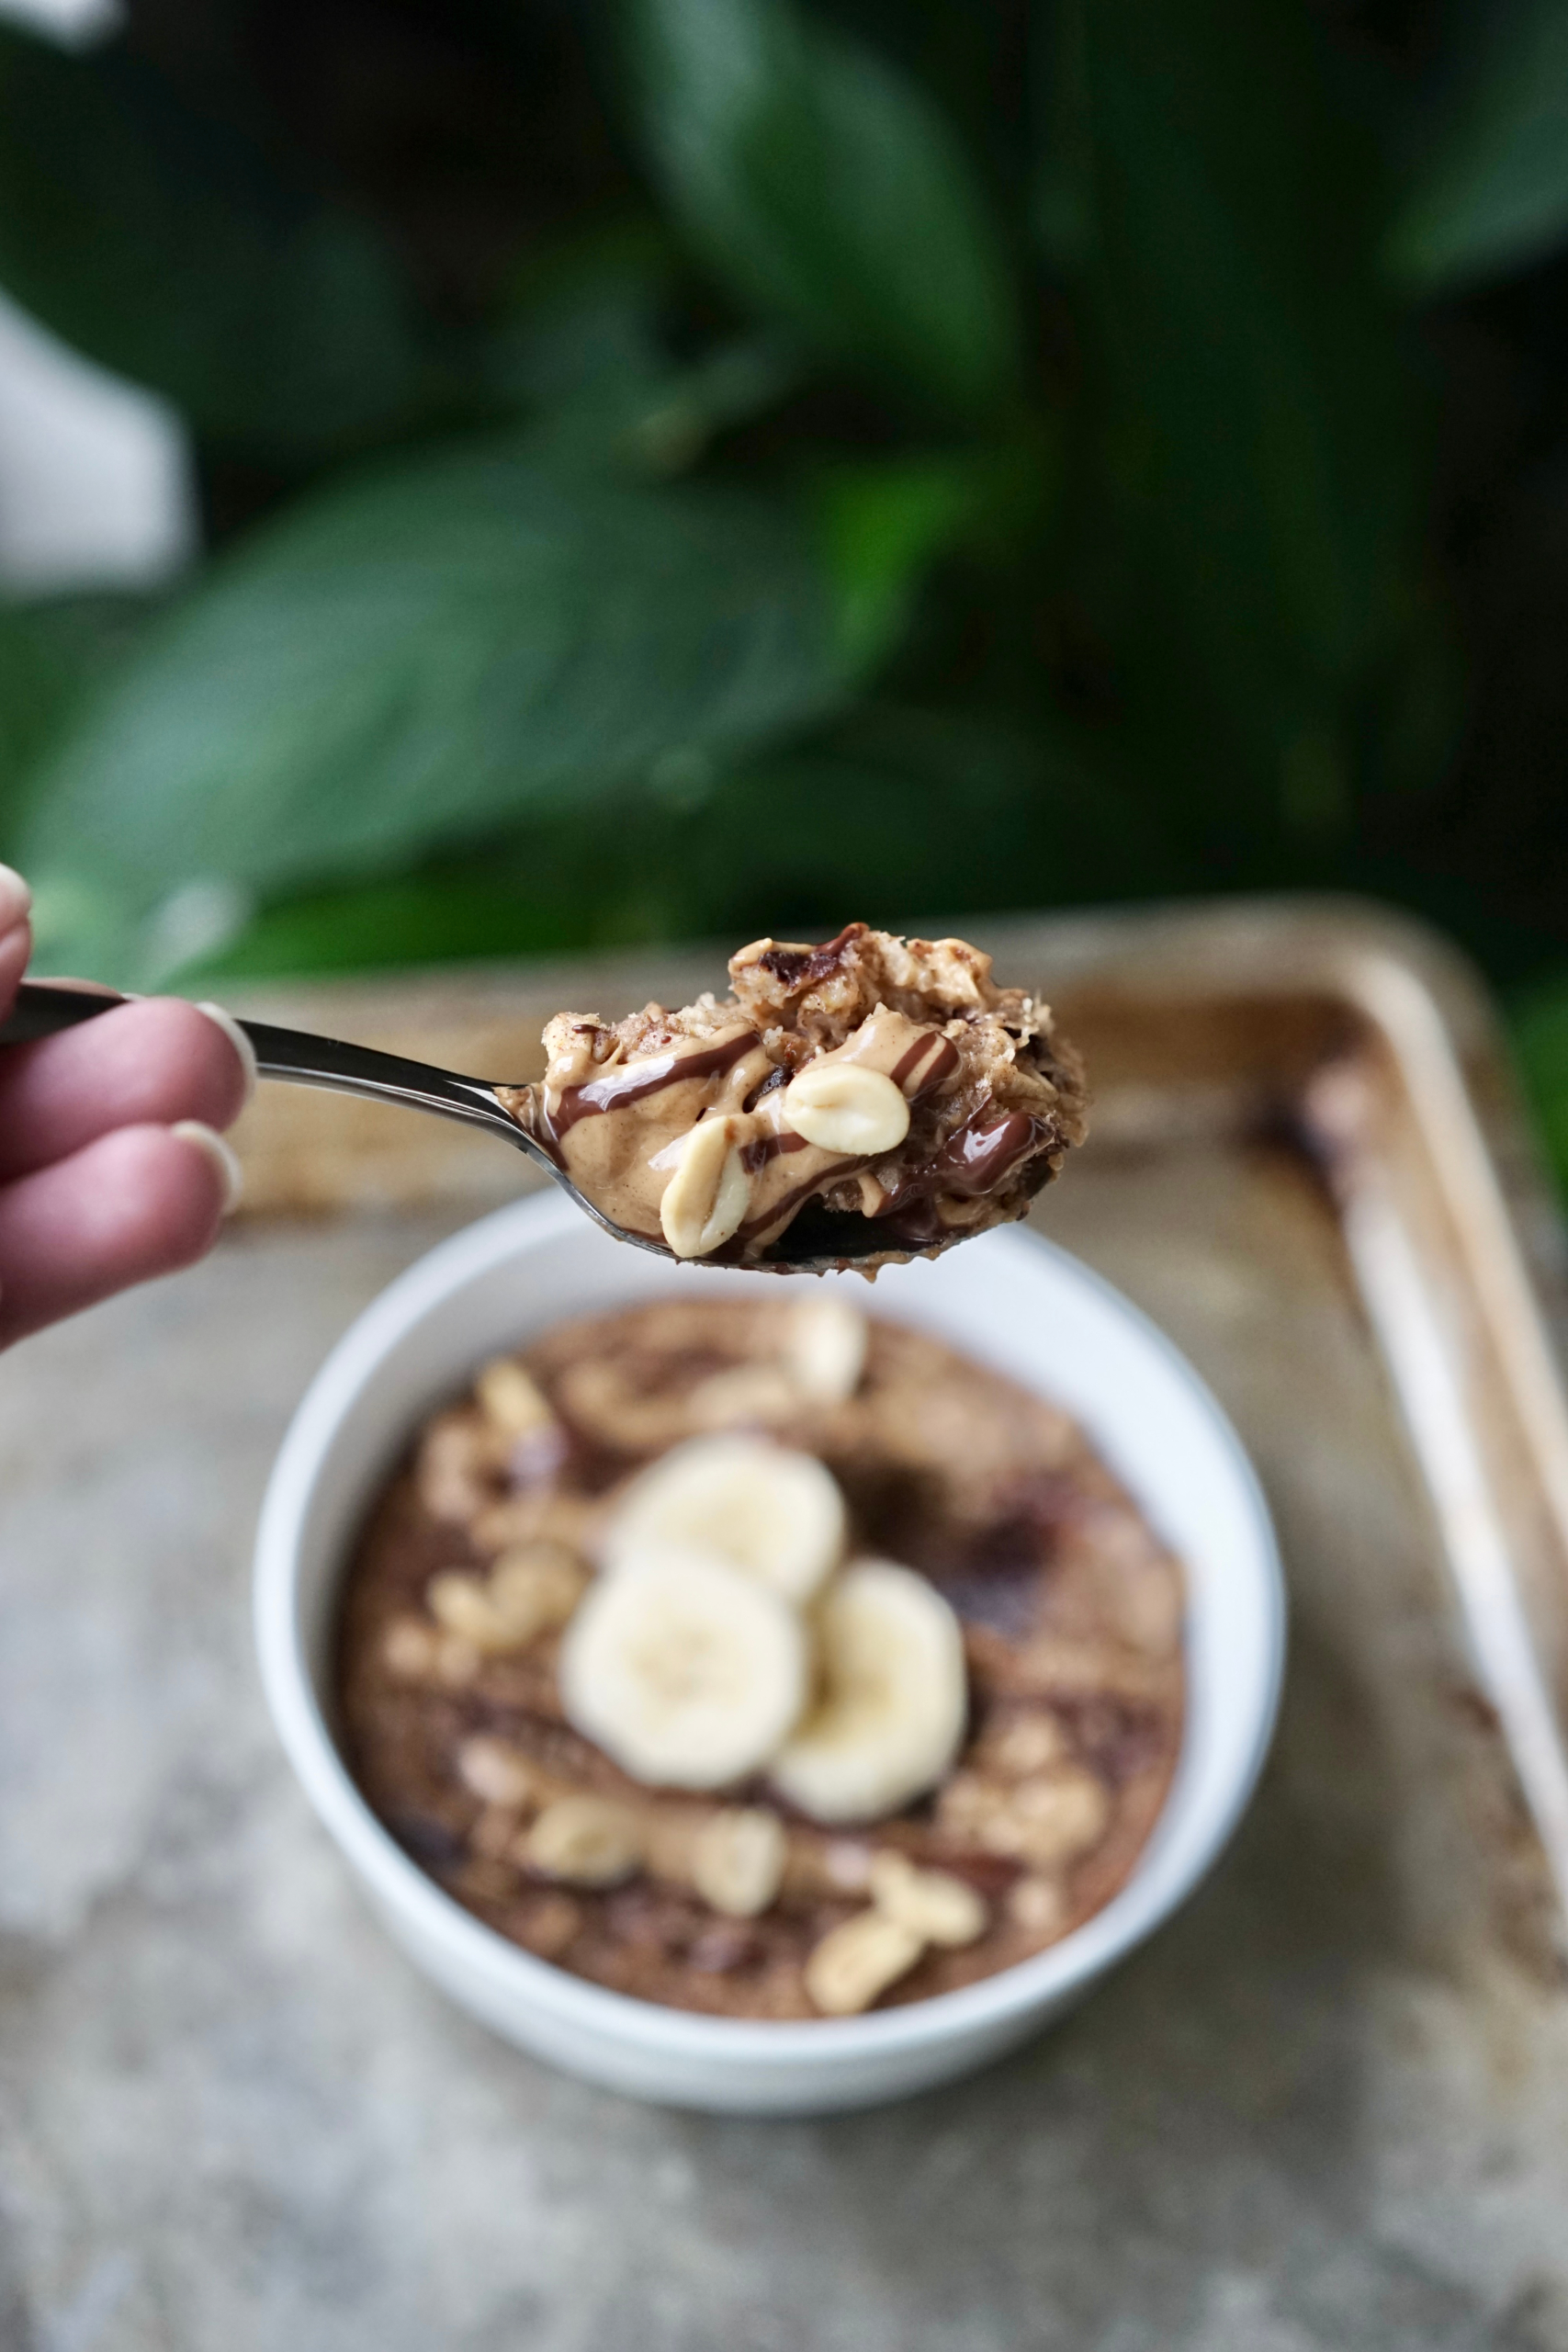 Baked Vegan Peanut Butter Banana Chocolate Chunk Oatmeal | Living Healthy in Seattle